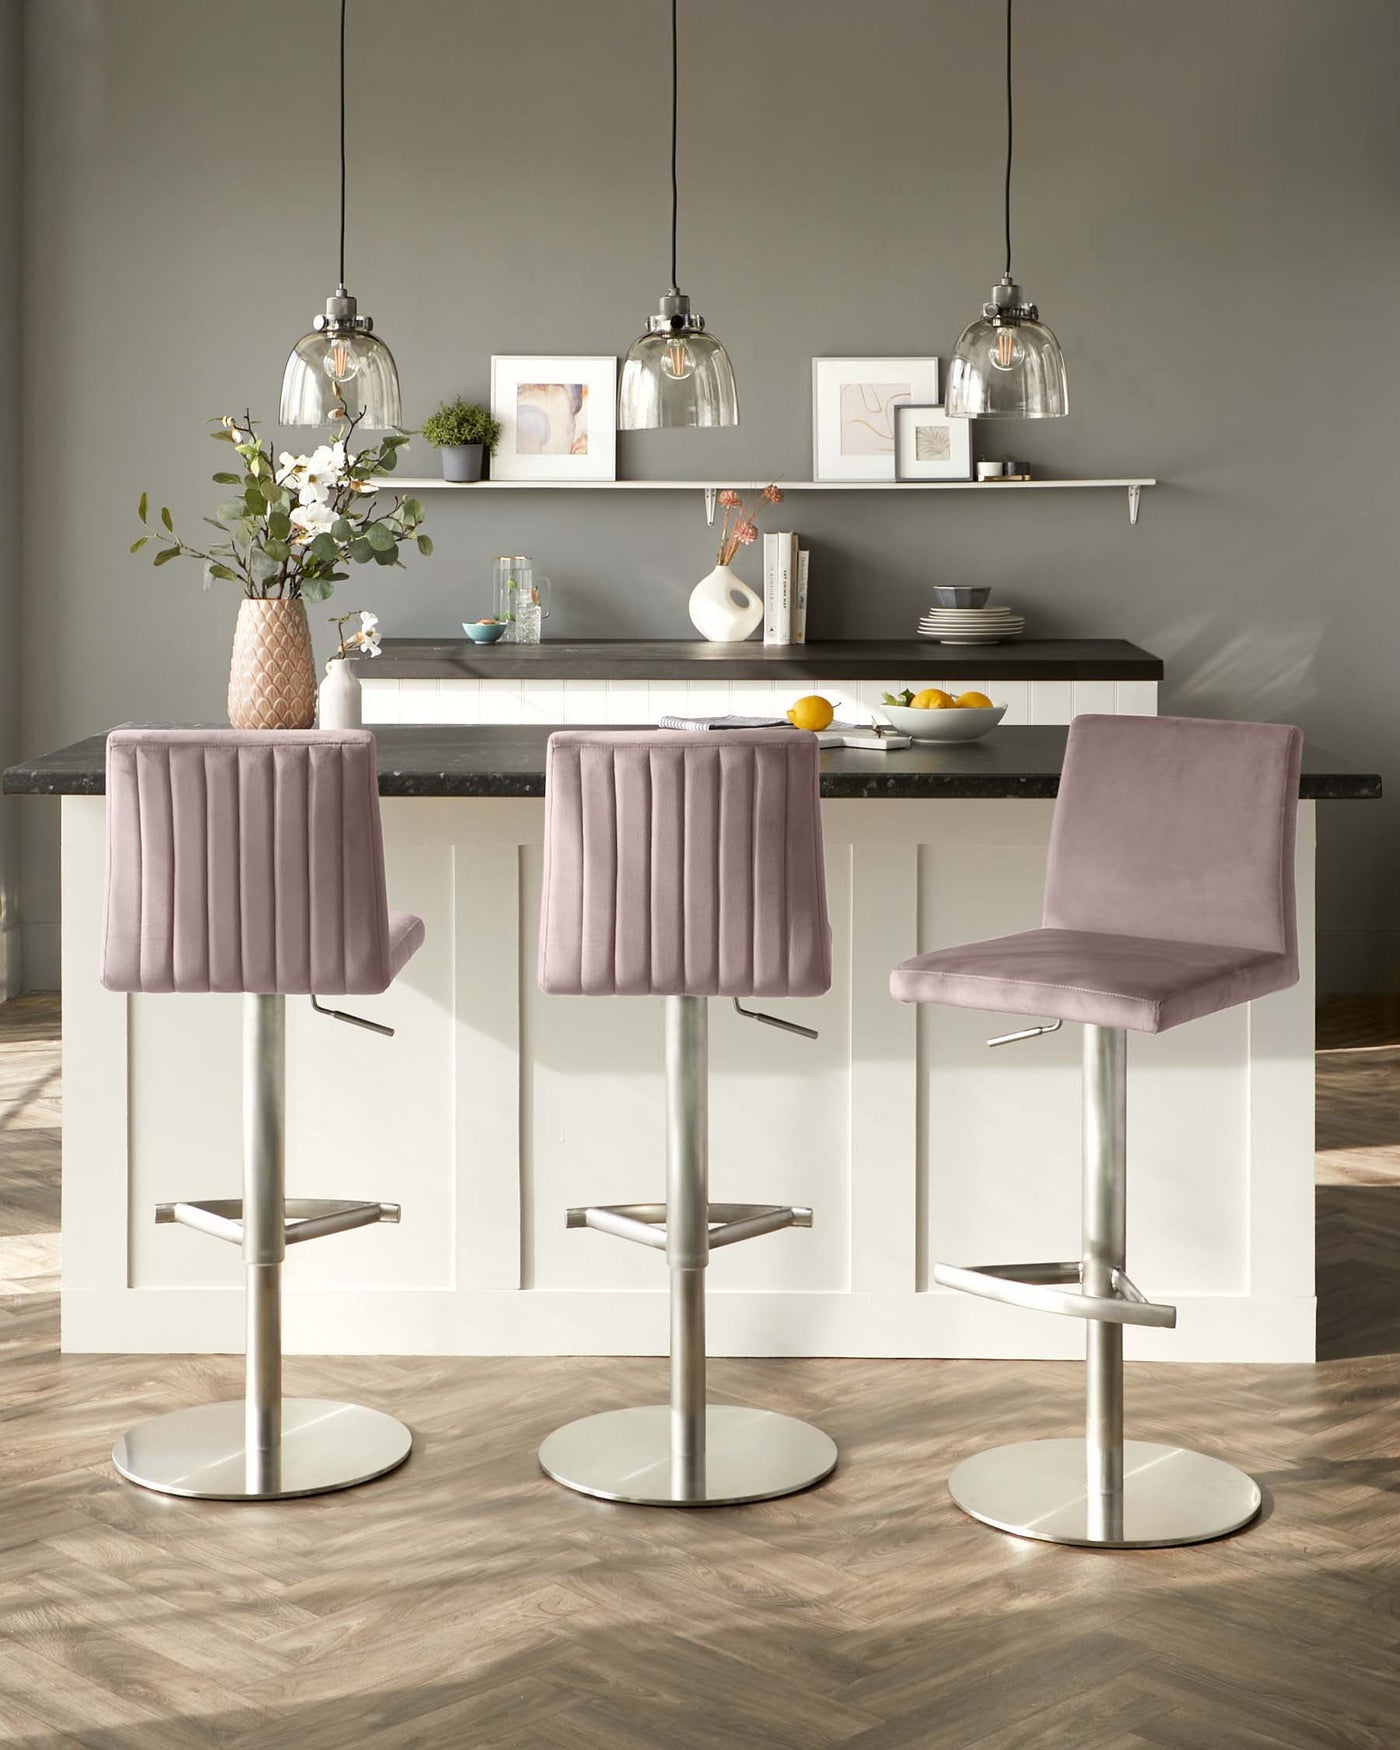 Modern kitchen interior featuring three plush, mauve-pink bar stools with backrests, mounted on sleek, adjustable-height chrome pedestals with circular bases and footrests. The bar stools are placed in front of a kitchen island with a white cabinet and a dark countertop, under elegant glass pendant lights. The shelves above the island display minimalist decorative items.